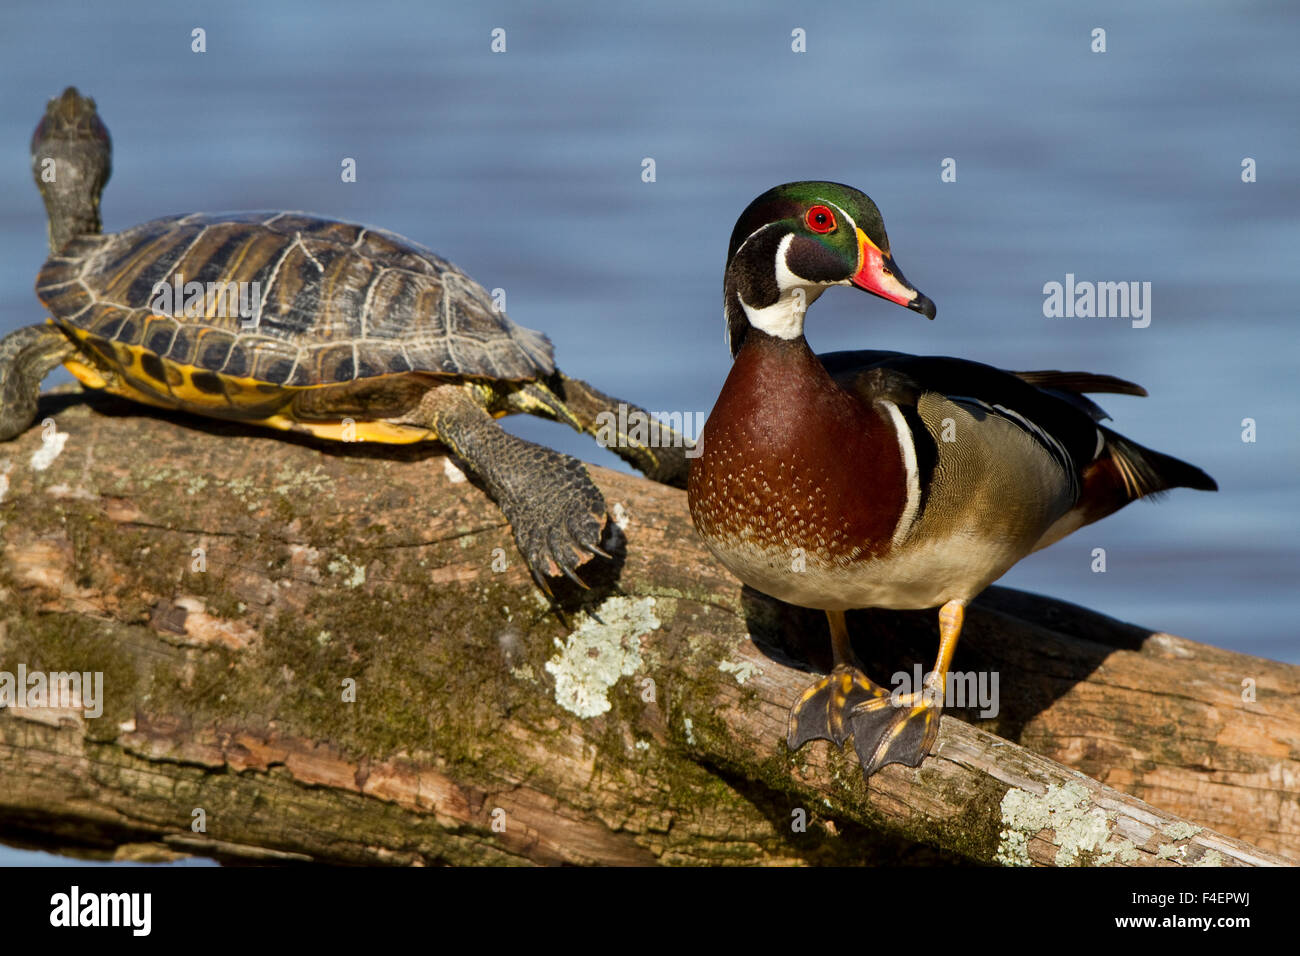 Wood Duck (Aix sponsa) male and Slider turtle (Trachemys scripta) on log in wetland, Marion, Illinois, USA. Stock Photo